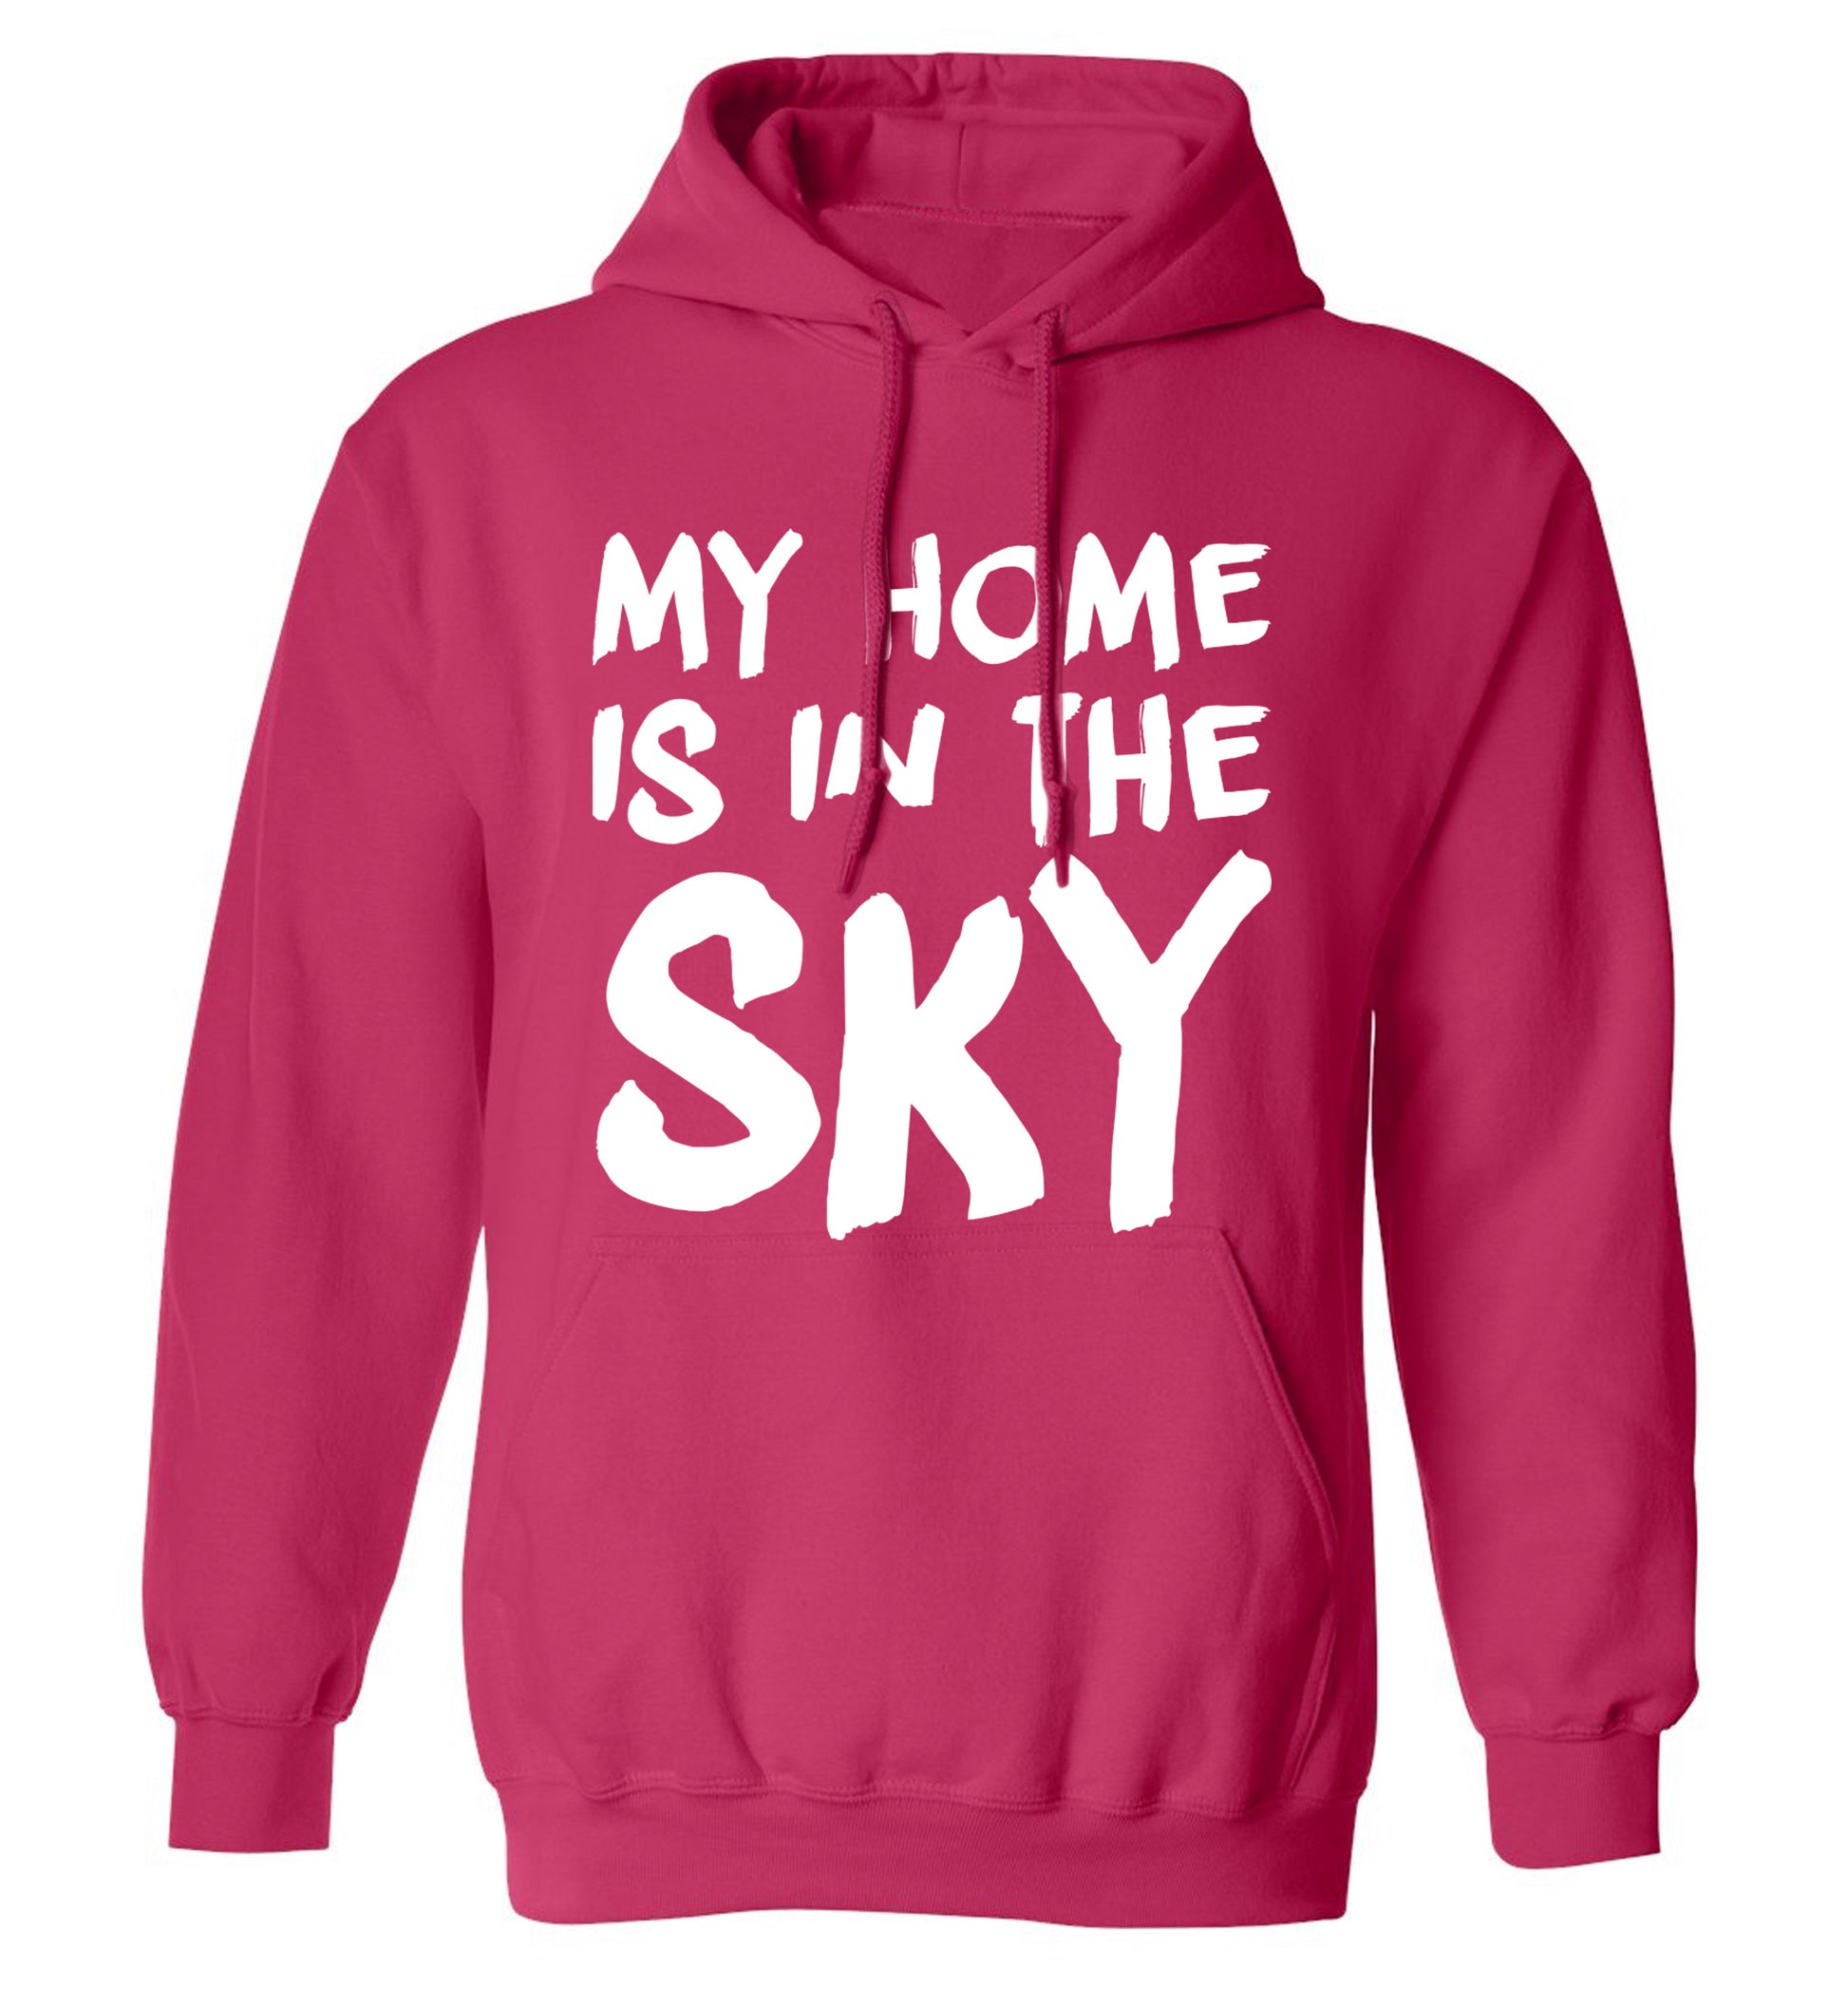 My home is in the sky adults unisex pink hoodie 2XL